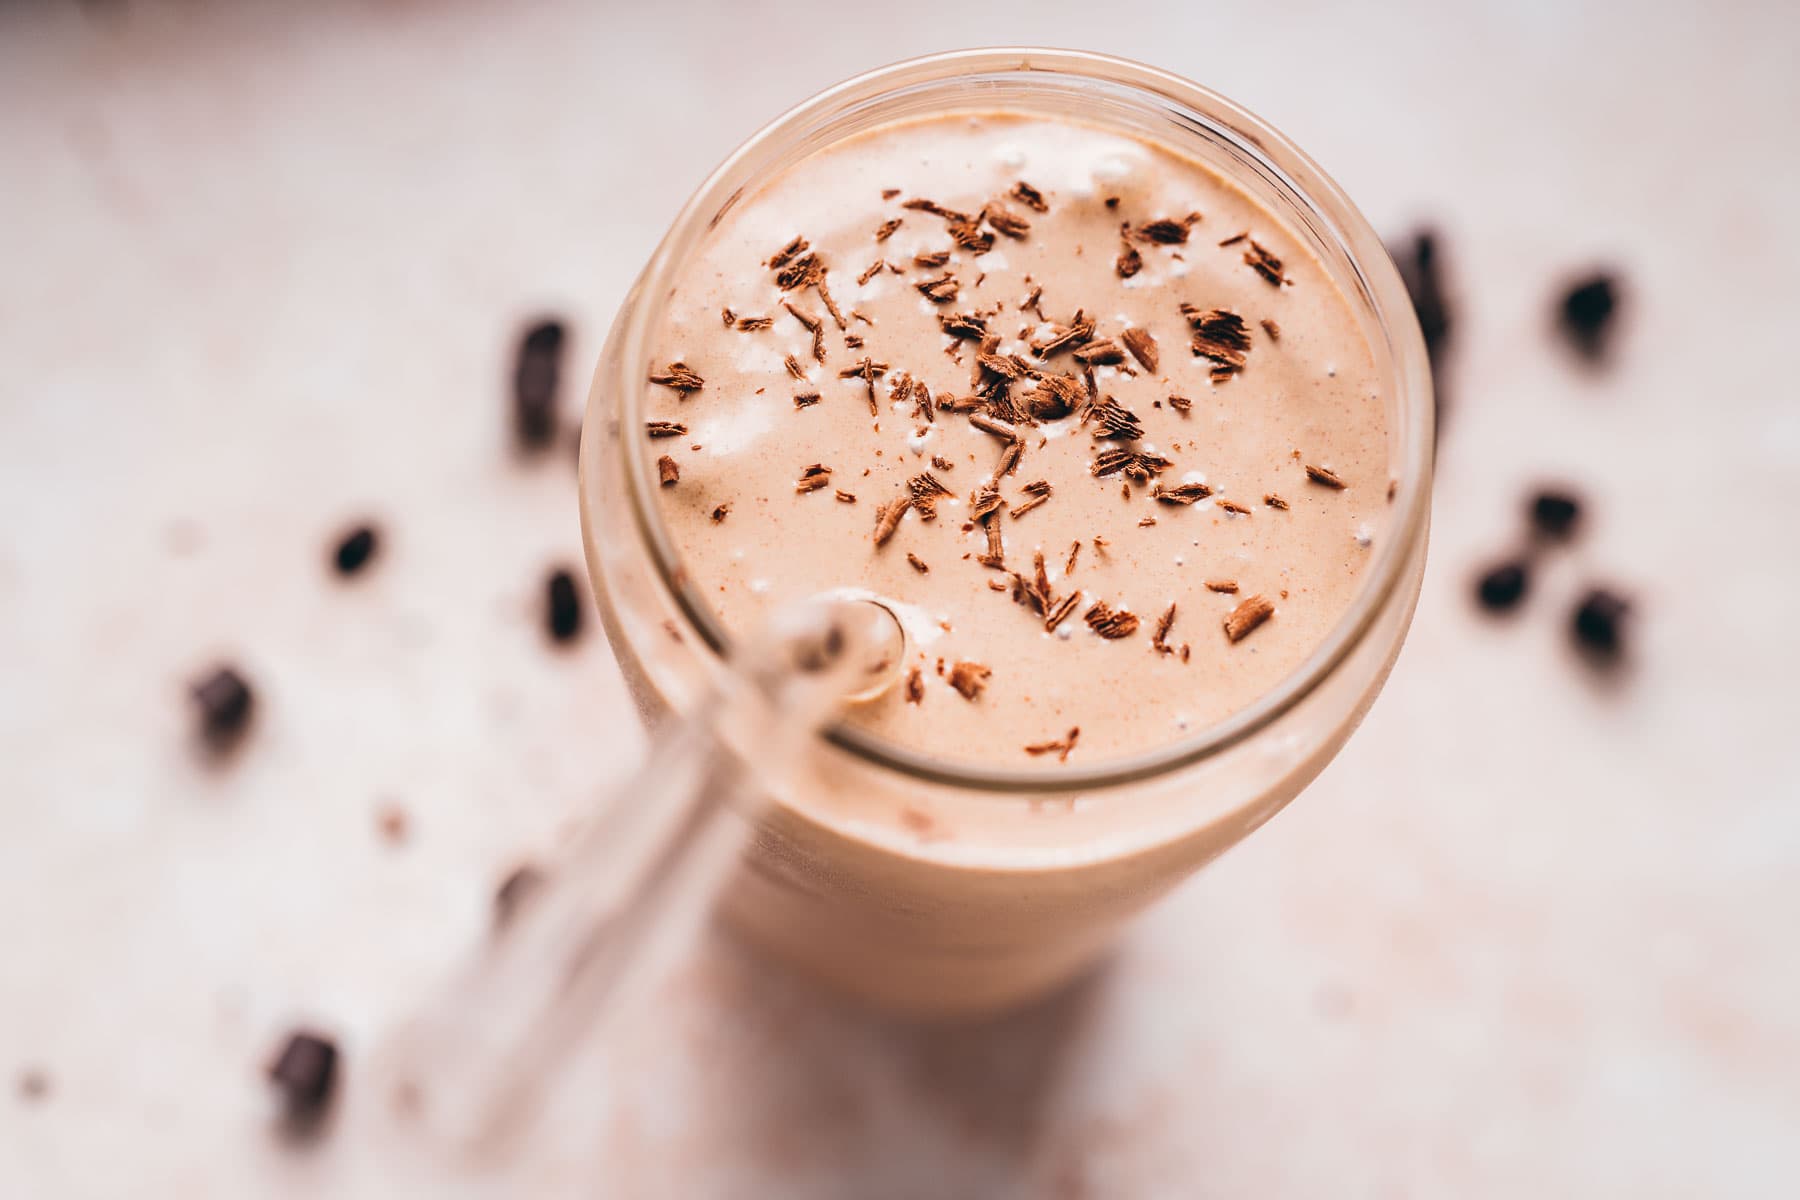 A clear glass filled with a tan shake topped with chocolate curls.